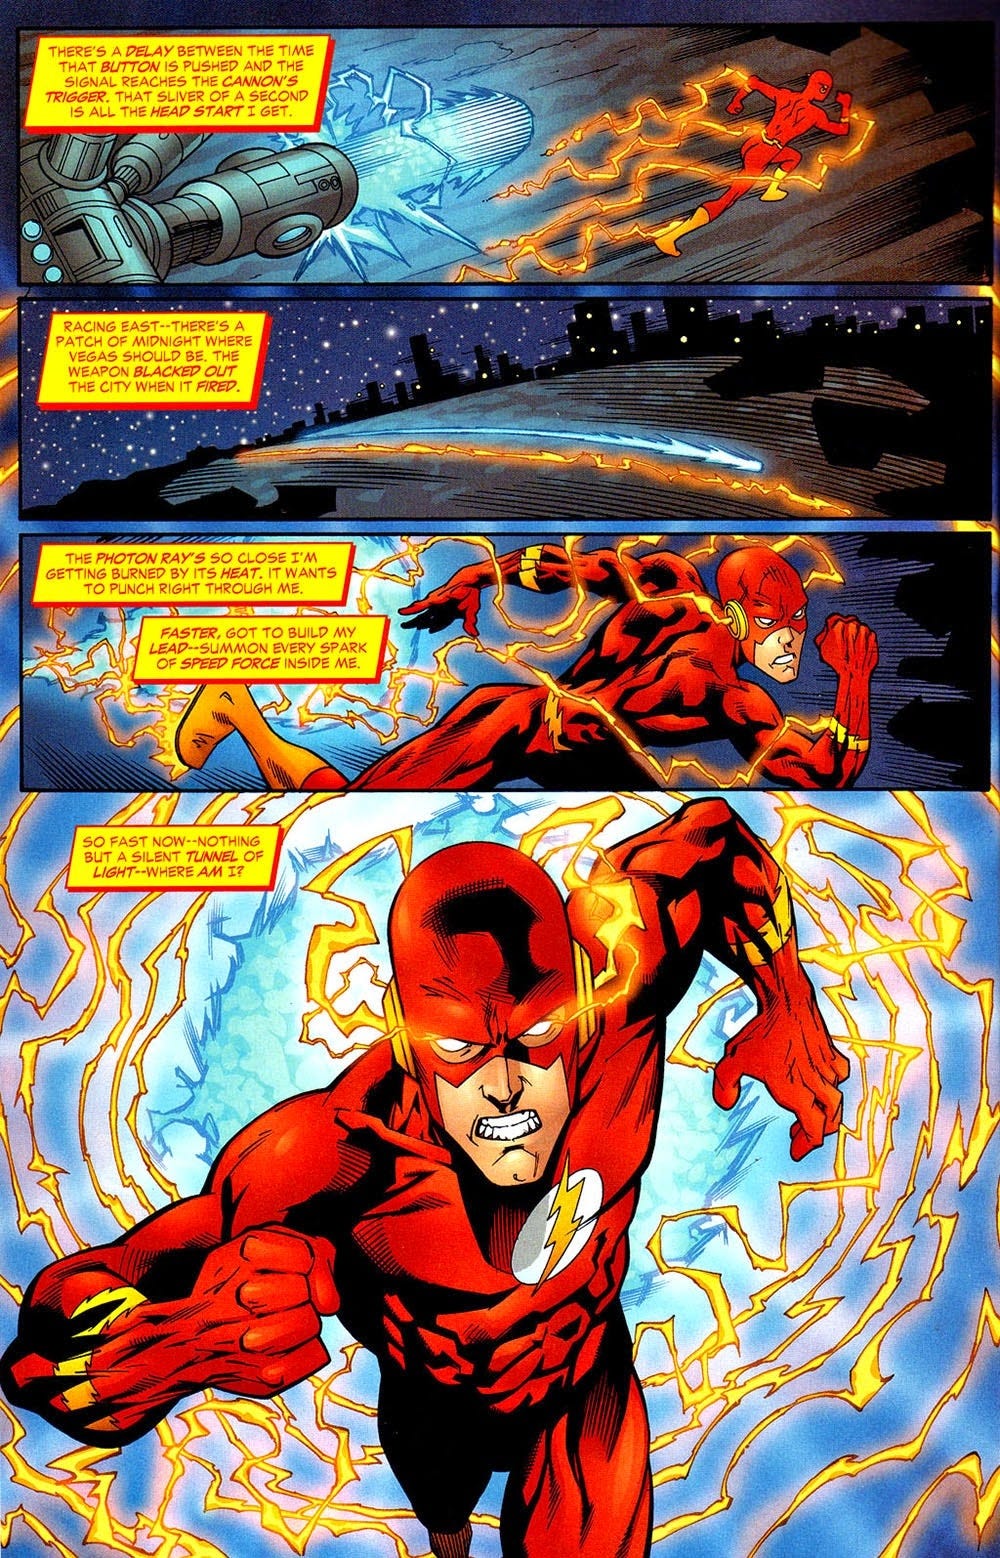 How Fast Is The Flash?